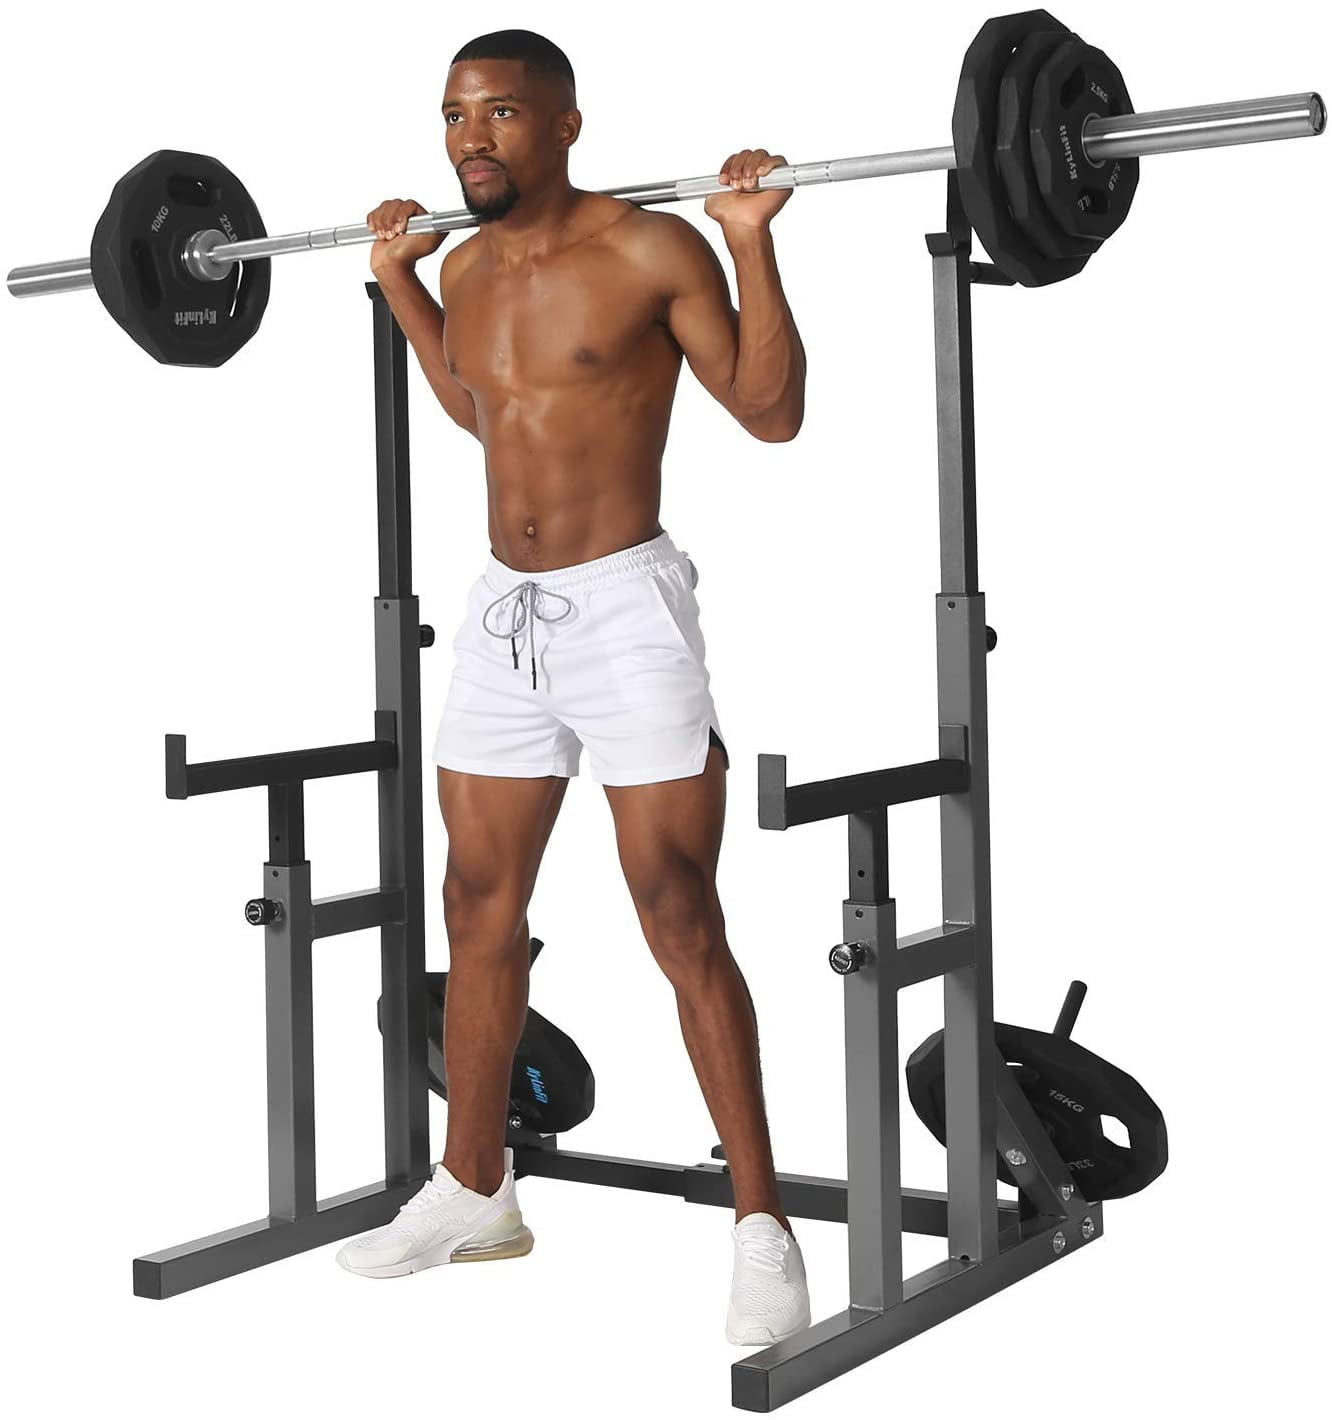 Heavy Duty Adjustable Squat Rack Dip Stand Barbell Power Weight Lifting Home Gym 